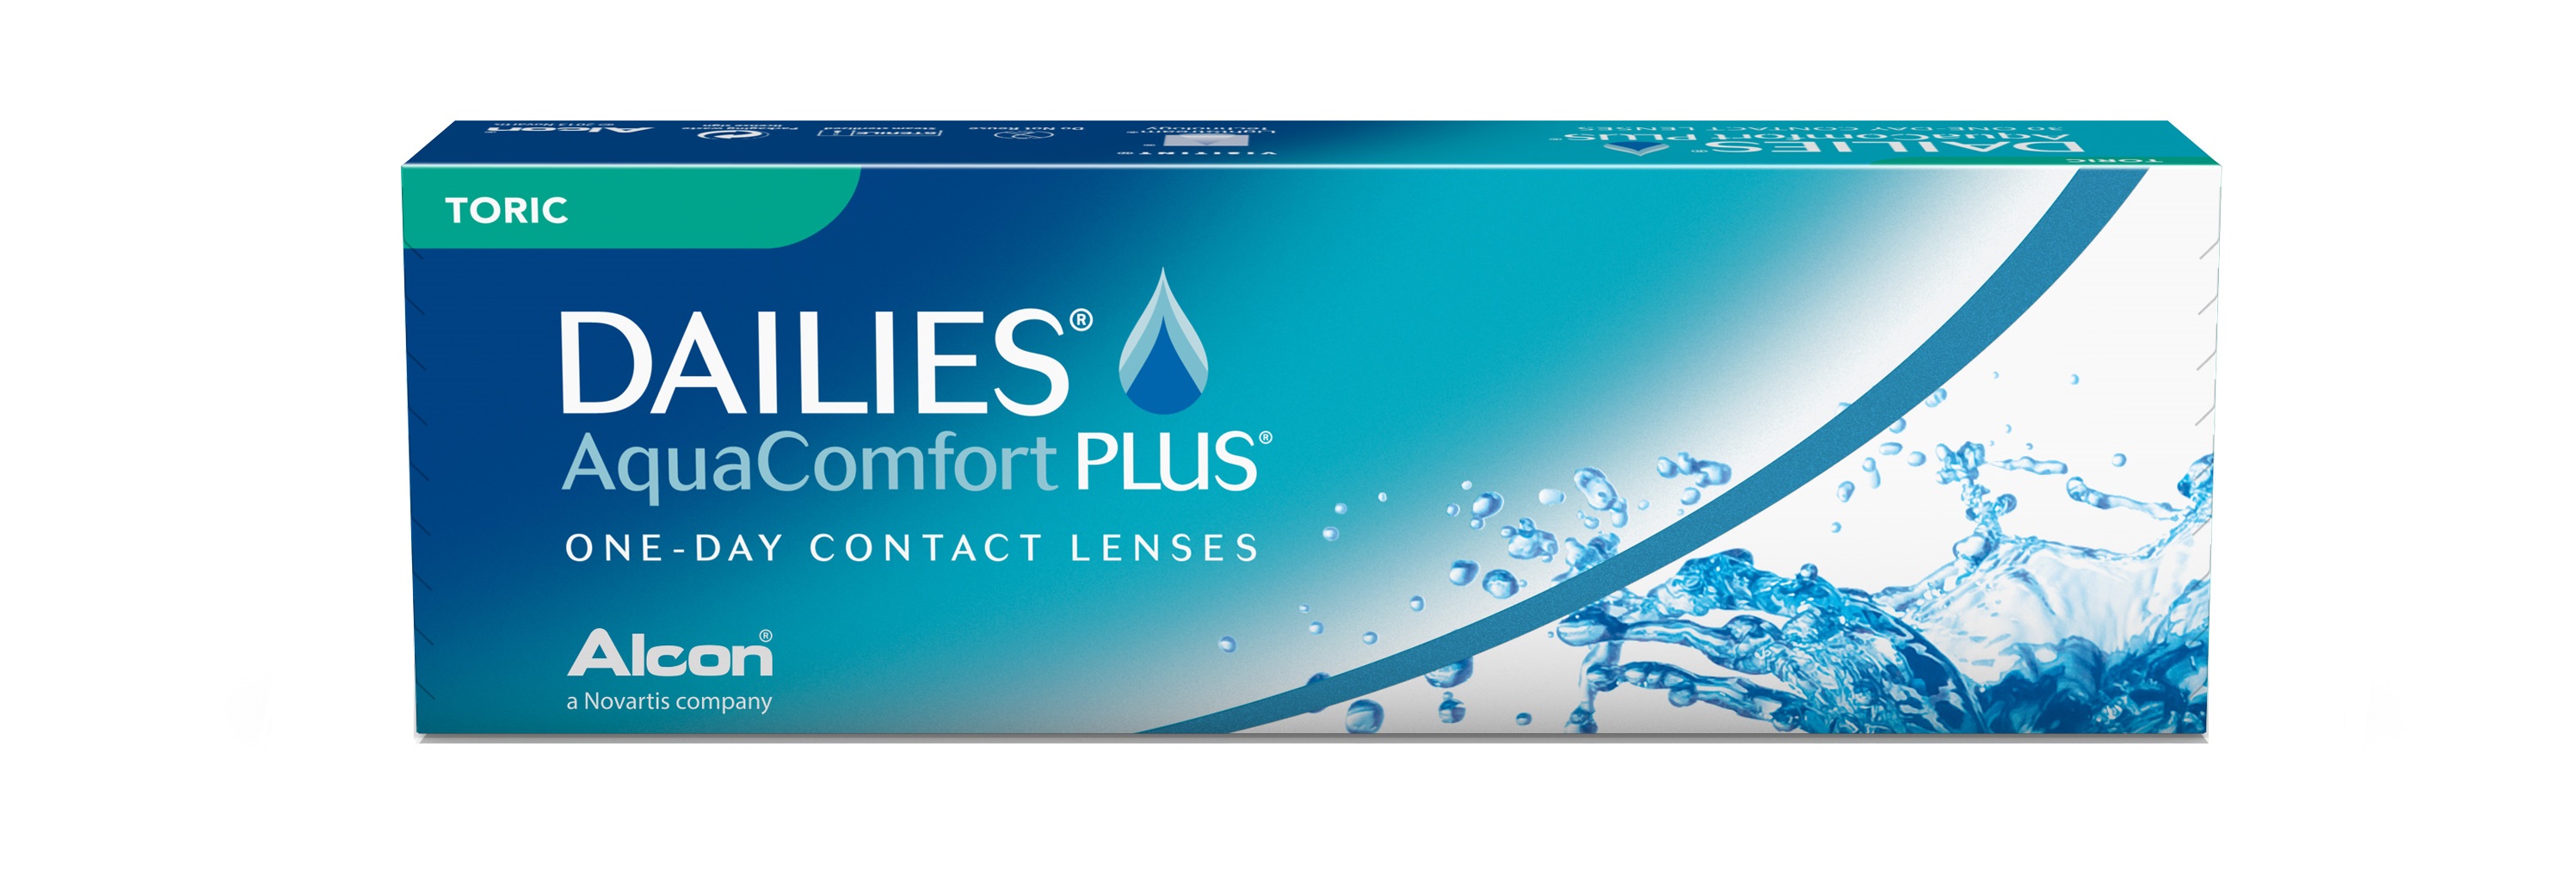 DAILIES AquaComfort PLUS TORIC 30 Pack large view angle 0